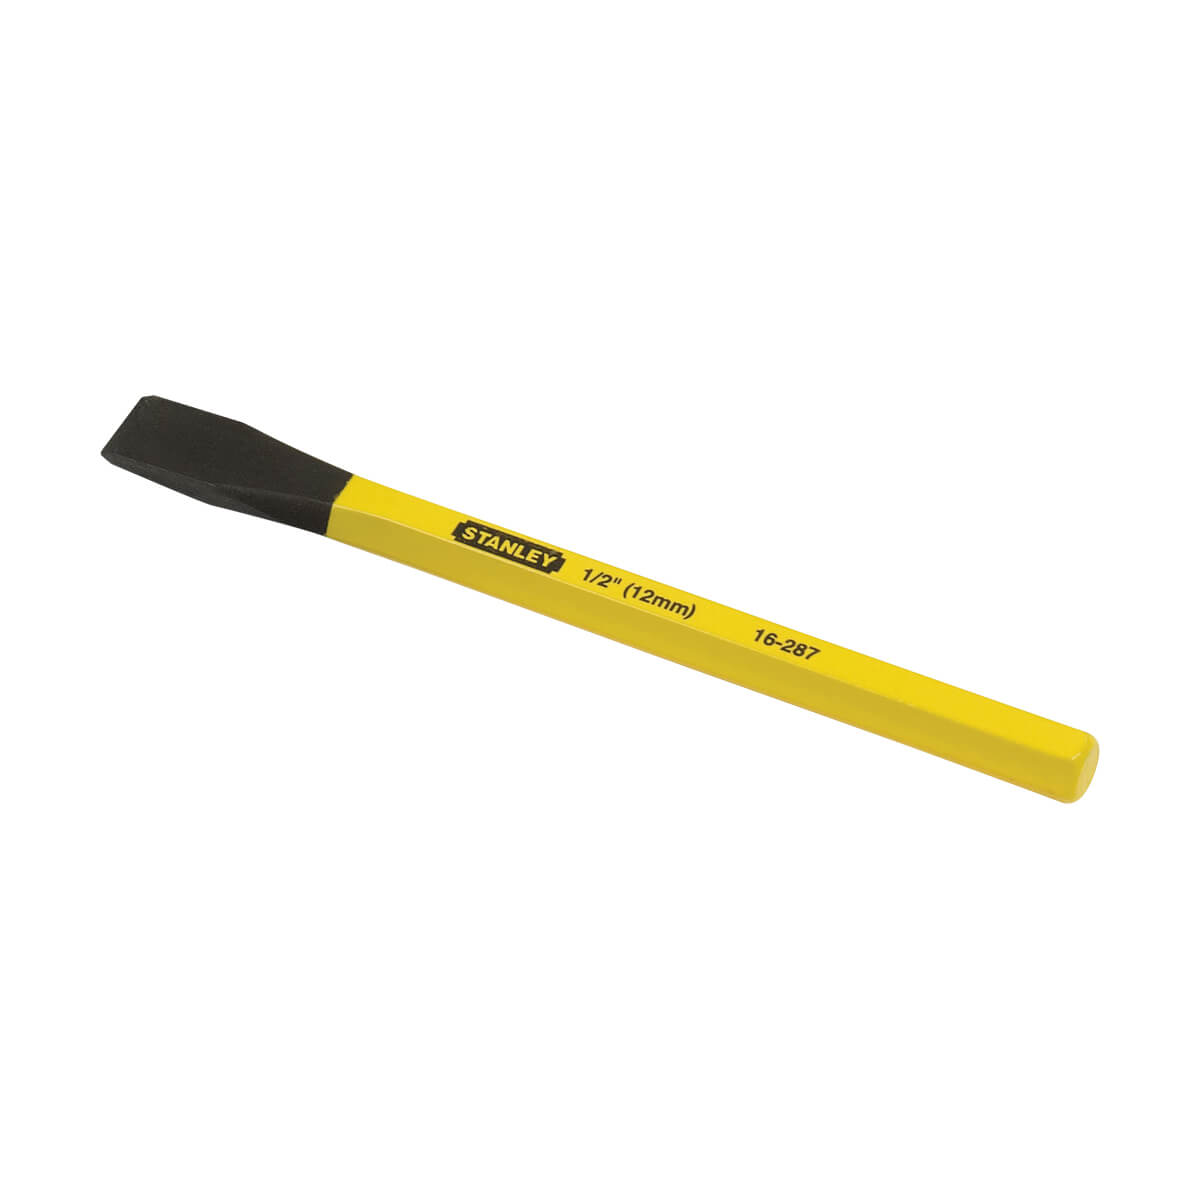 Stanley Cold Chisel - 1/2-in x 6-in